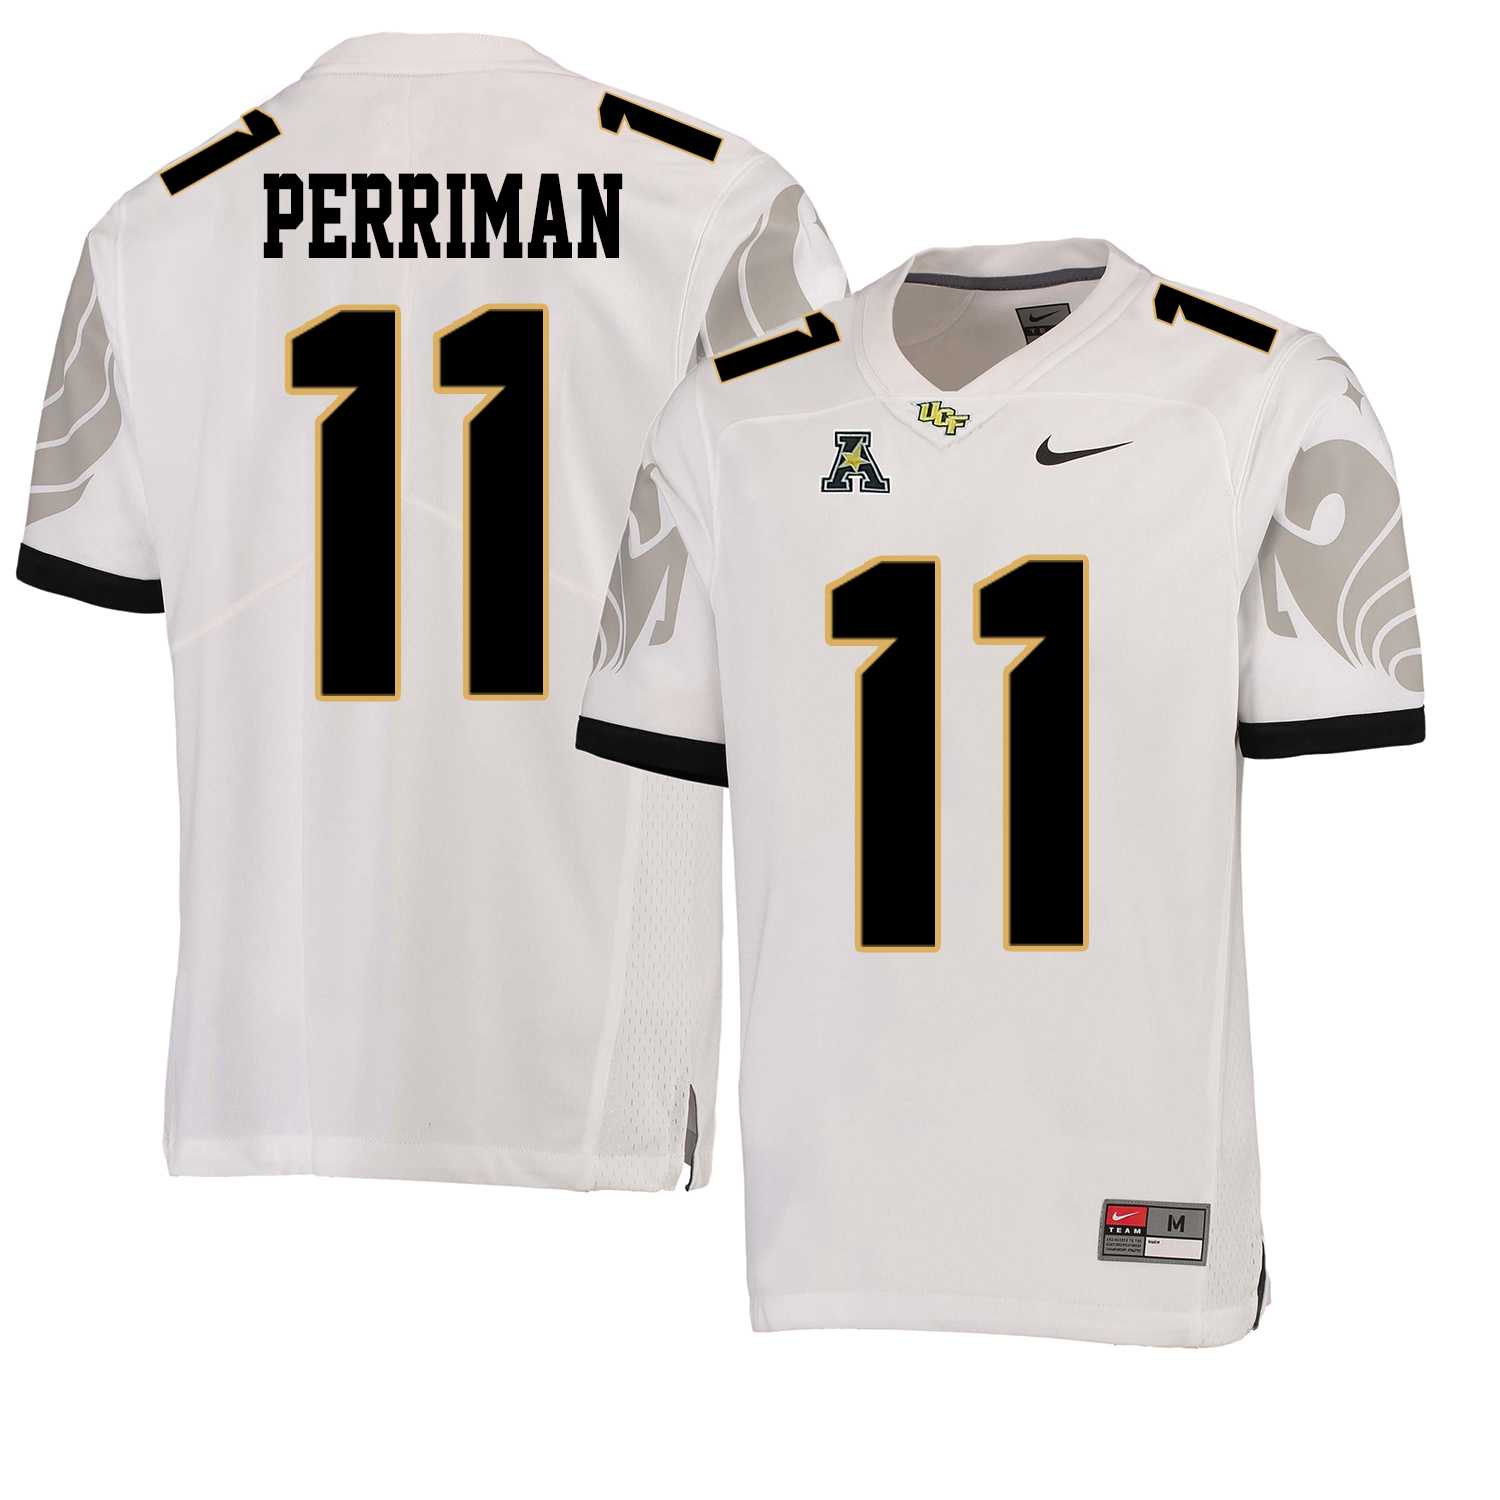 UCF Knights #11 Breshad Perriman White College Football Jersey